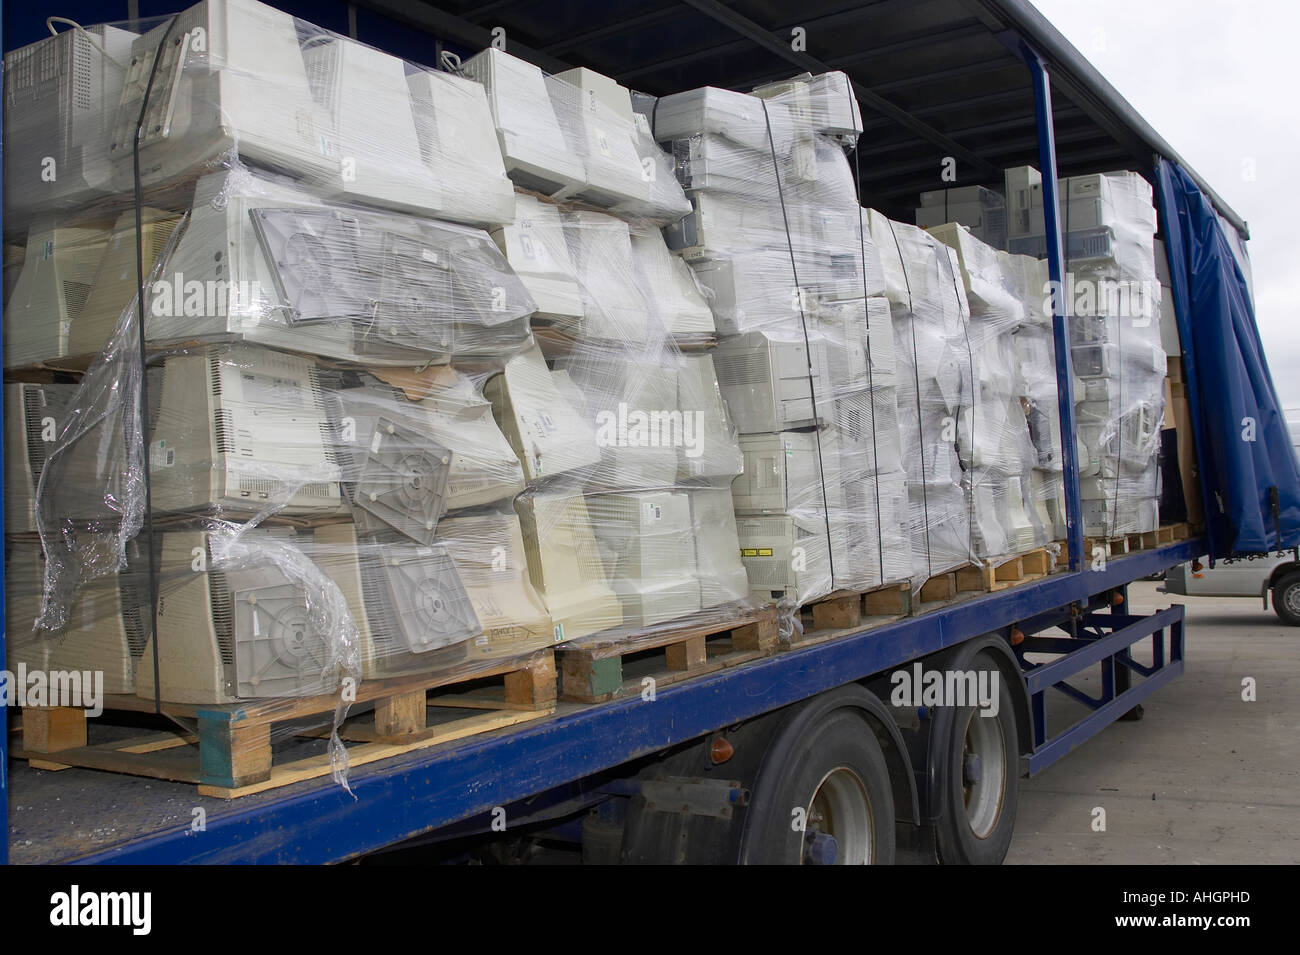 Open side of blue curtain lorry trailer containing pallets of wrapped computer monitors and system boxes for recycling Stock Photo